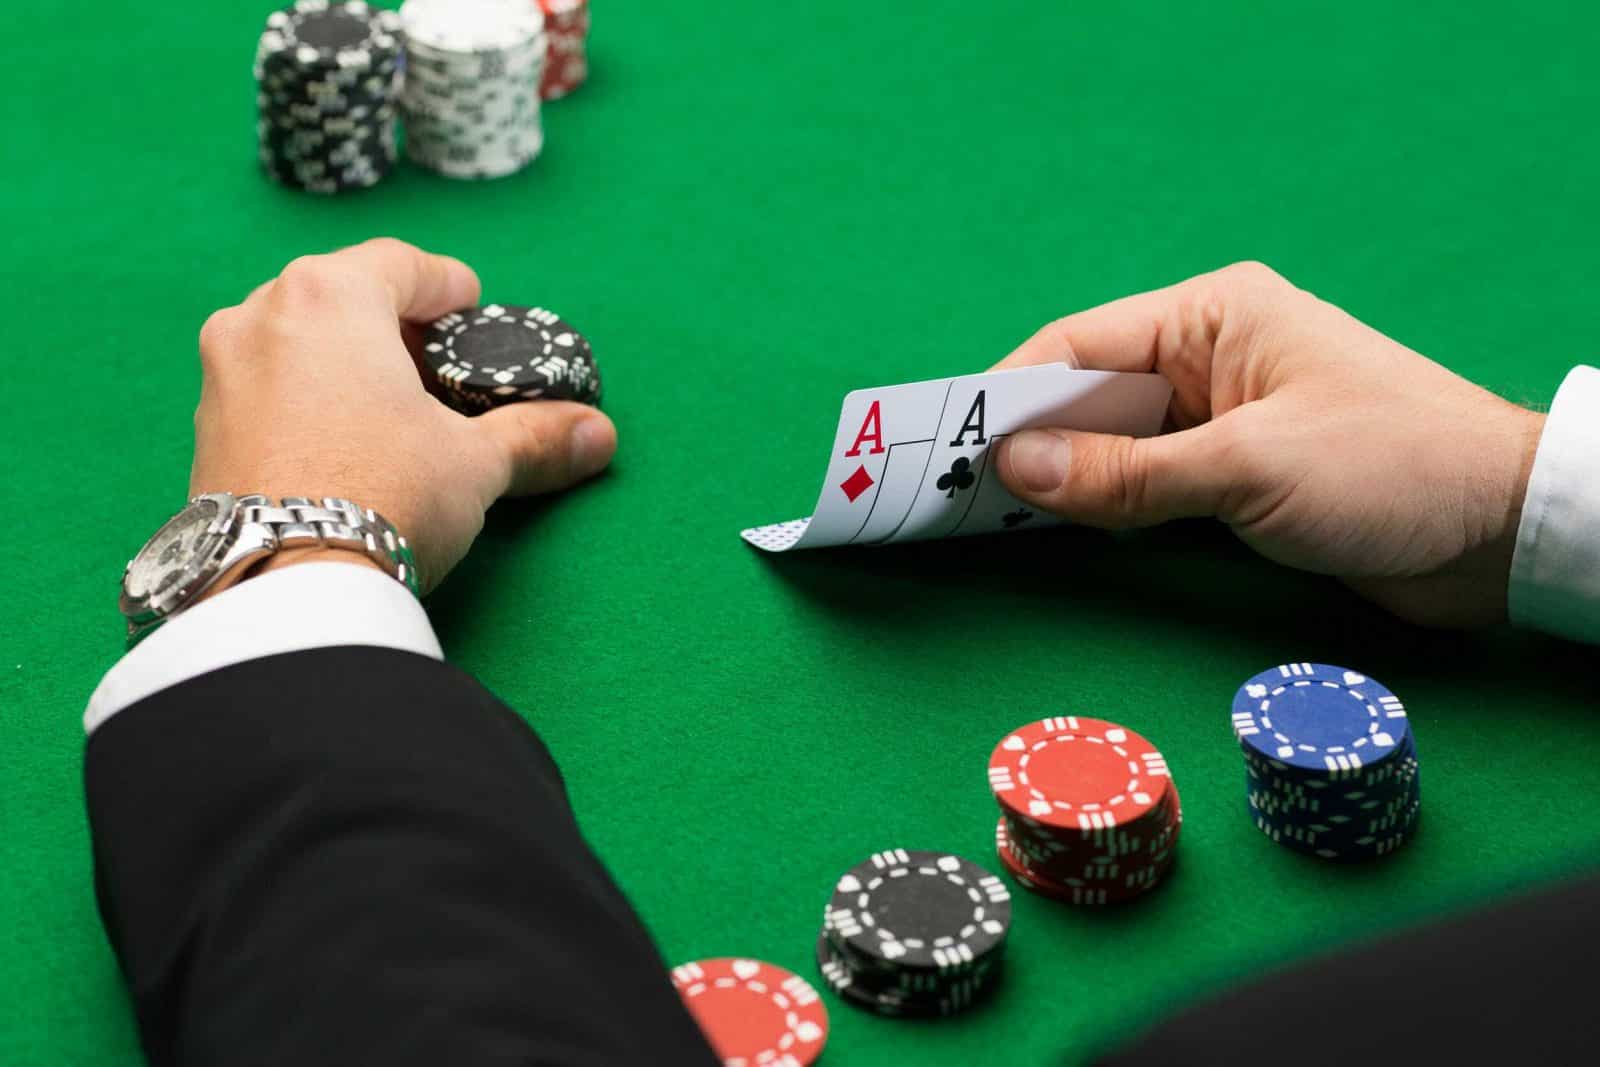 Oklahoma Man Convicted of Felony Tax Fraud After Using Investor Funds for Professional Poker